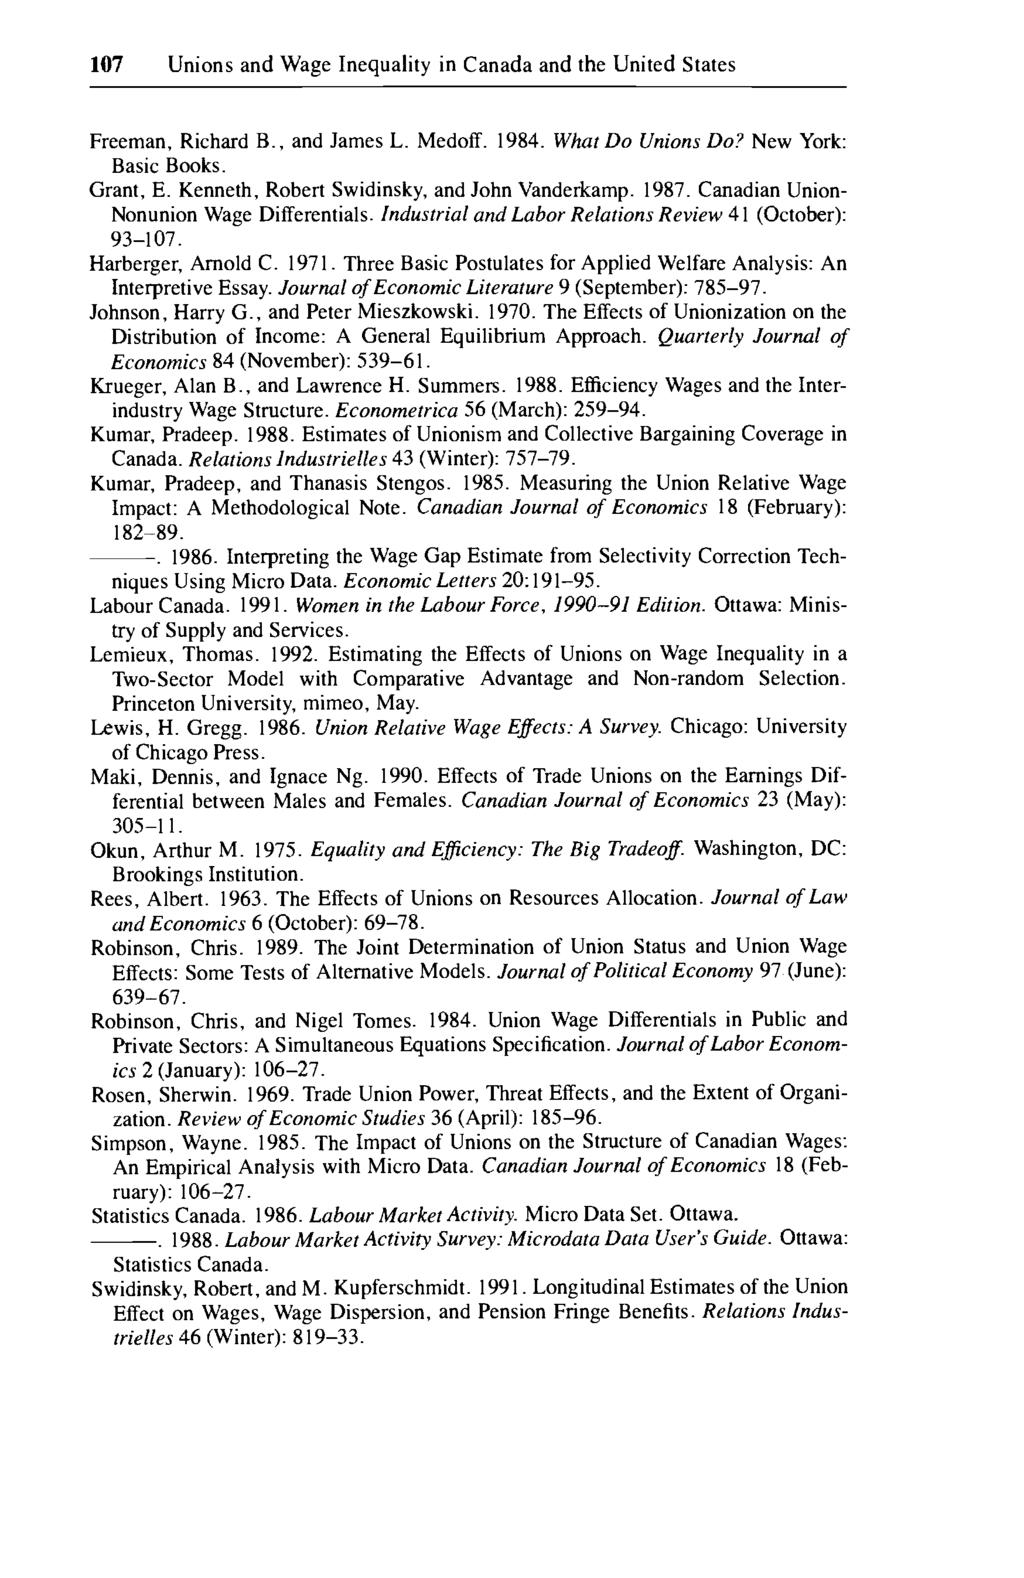 107 Unions and Wage Inequality in Canada and the United States Freeman, Richard B., and James L. Medoff. 1984. What Do Unions Do? New York: Basic Books. Grant, E.